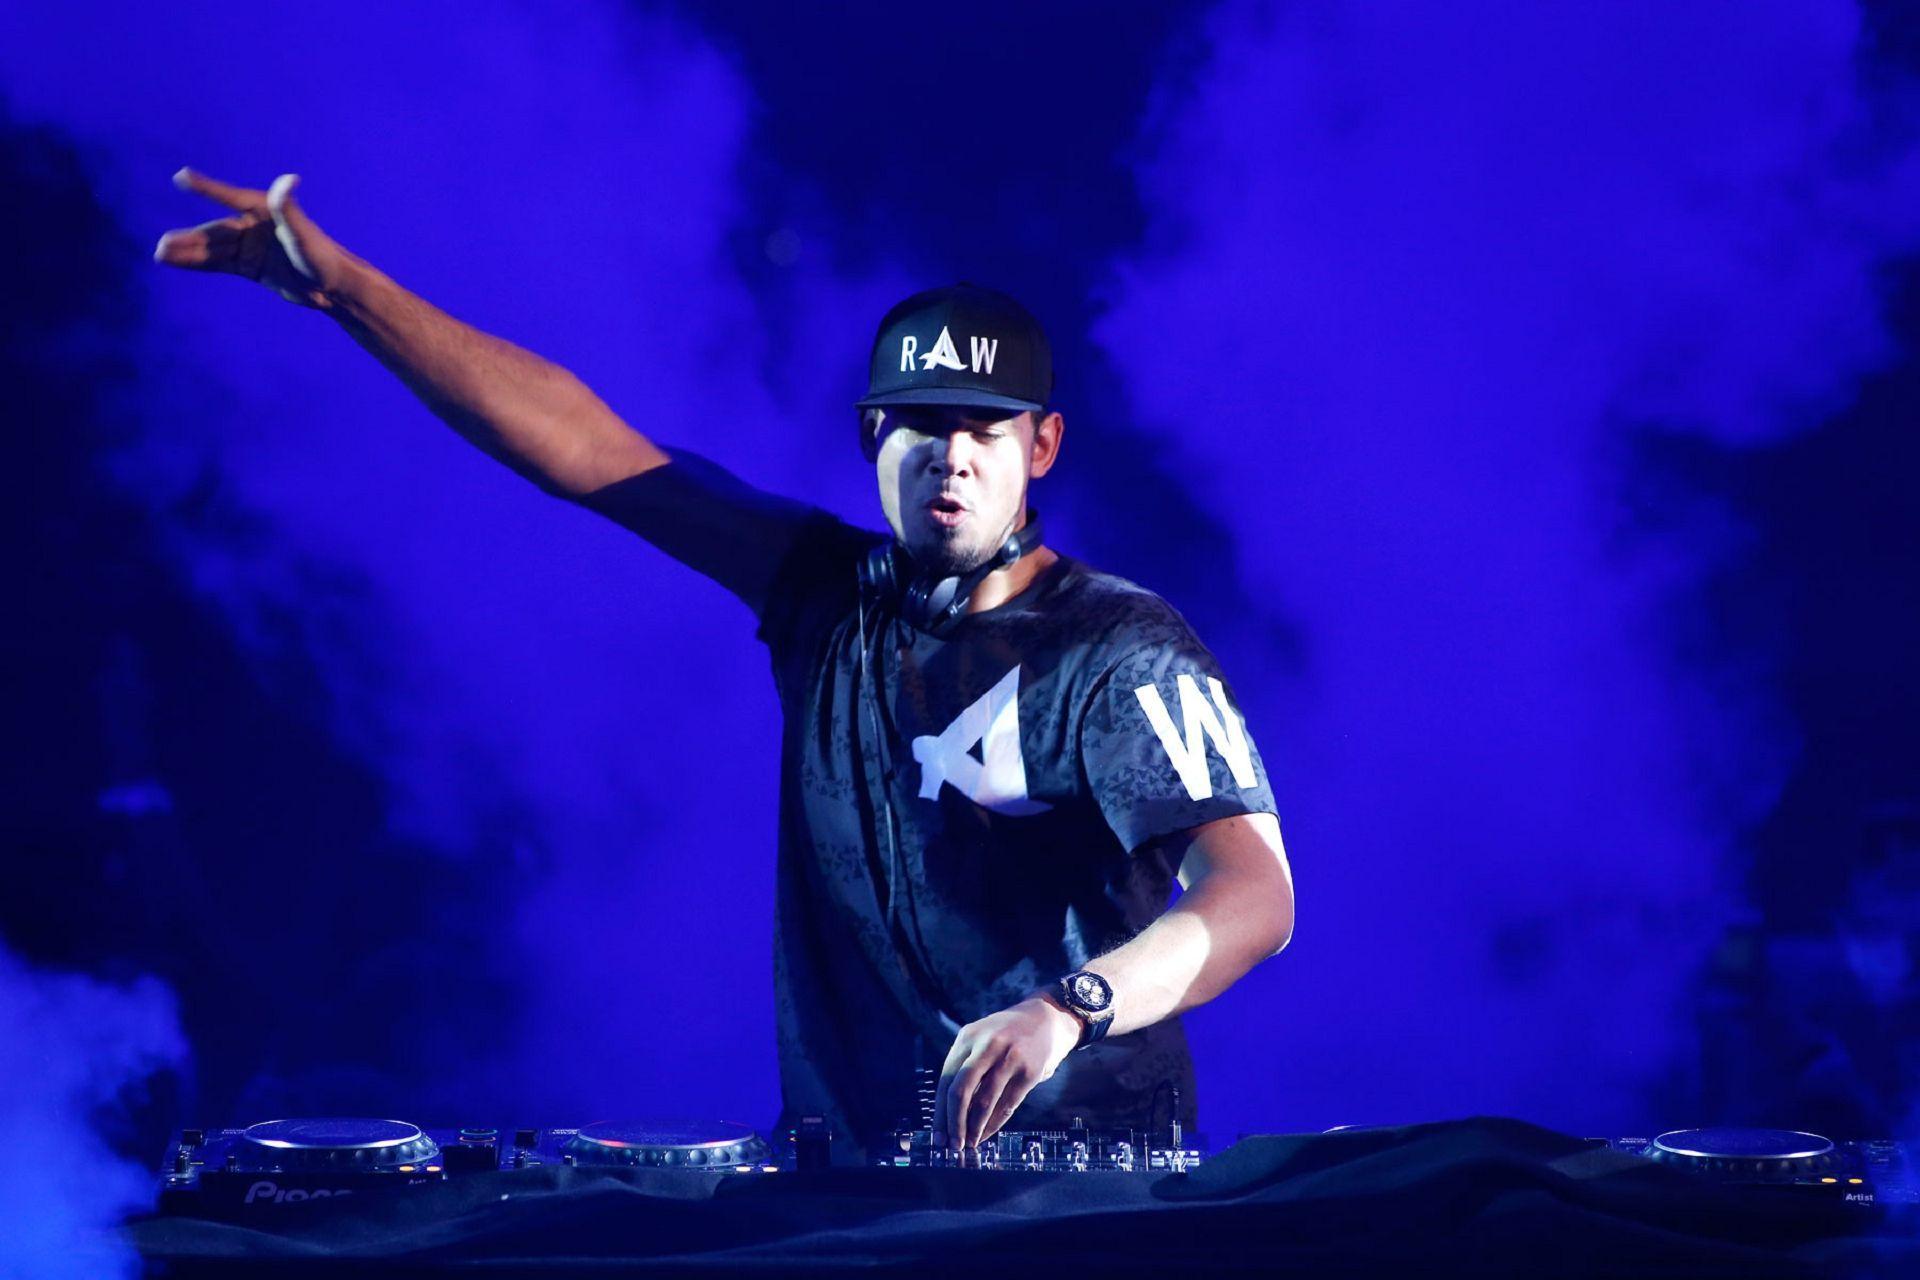 Afrojack Wallpaper Image Photo Picture Background